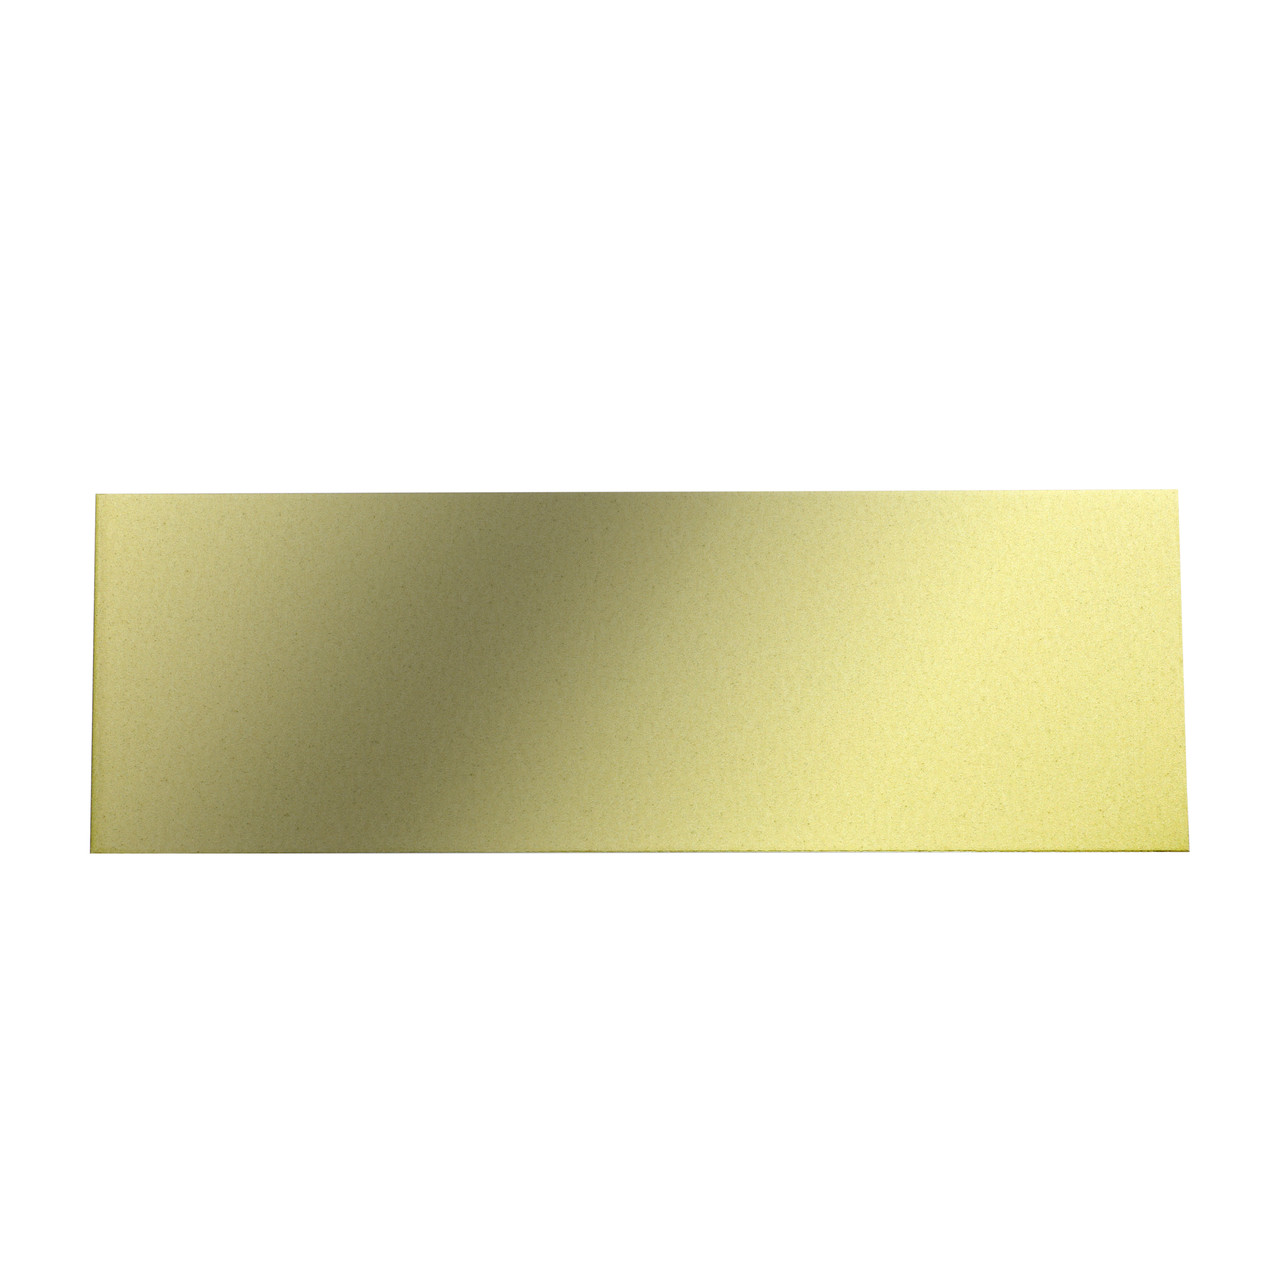 3 x 1 Brass Tags Blank Rectangle .040